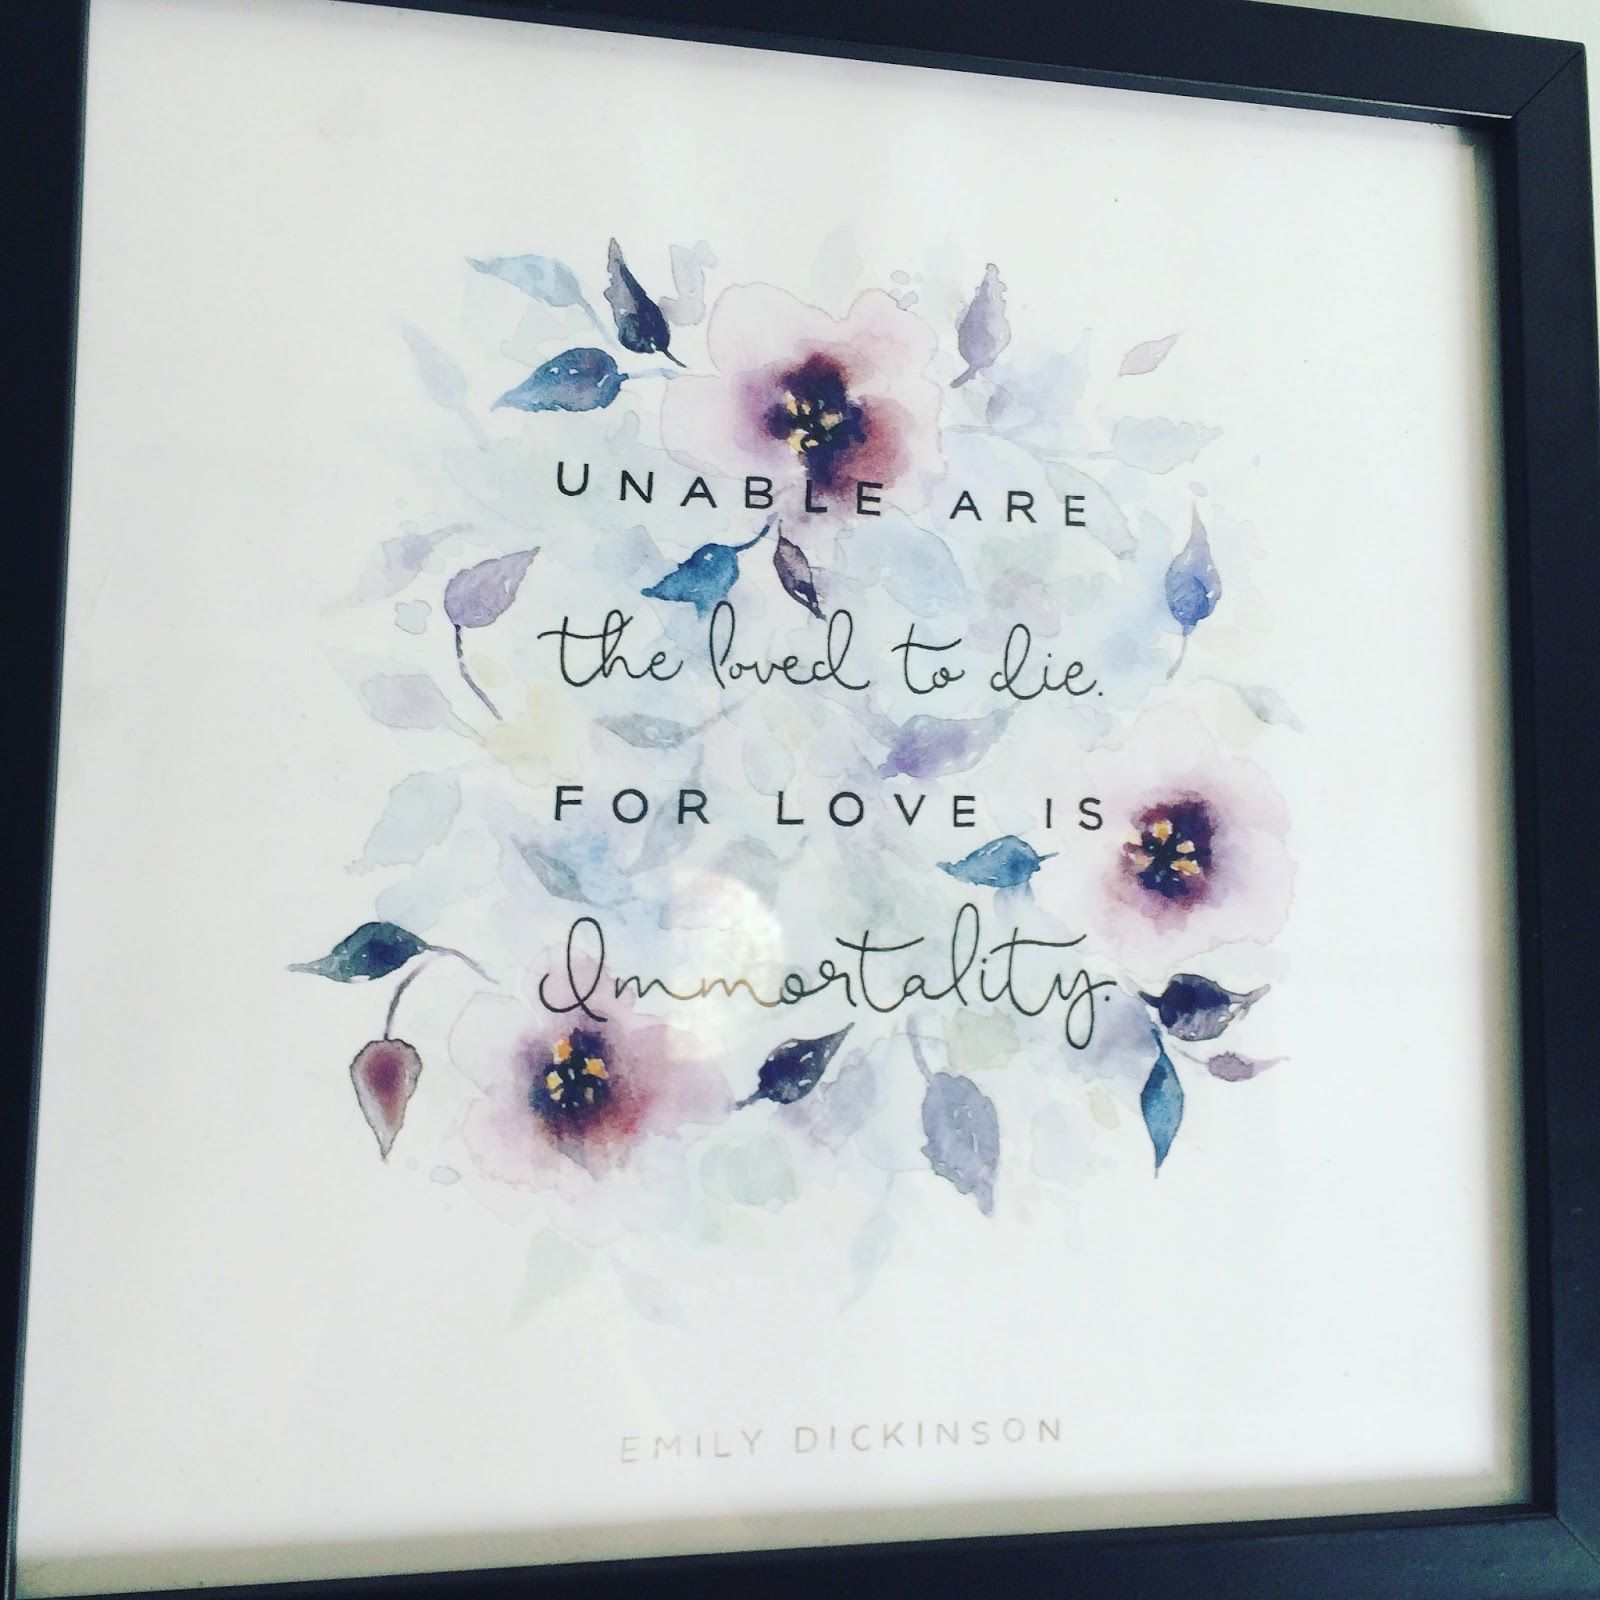 Print of flowers that says "Unable are the love to die for love is immortality"